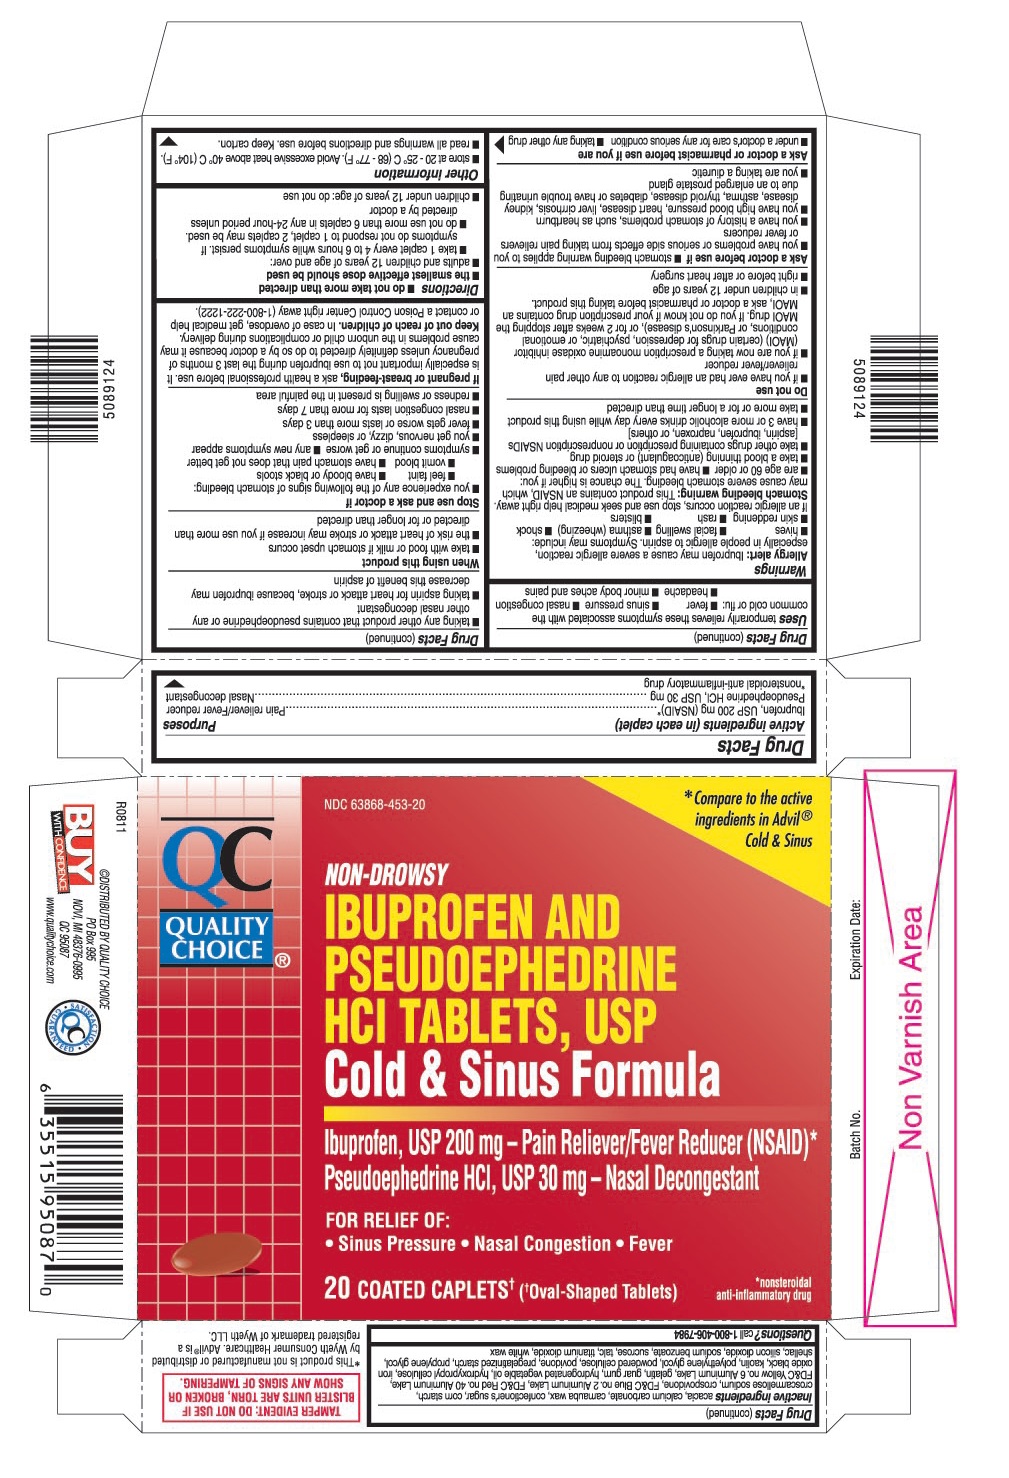 This is the 20 count blister carton label for Quality Choice Ibuprofen and Pseudoephedrine HCl Tablets, USP.